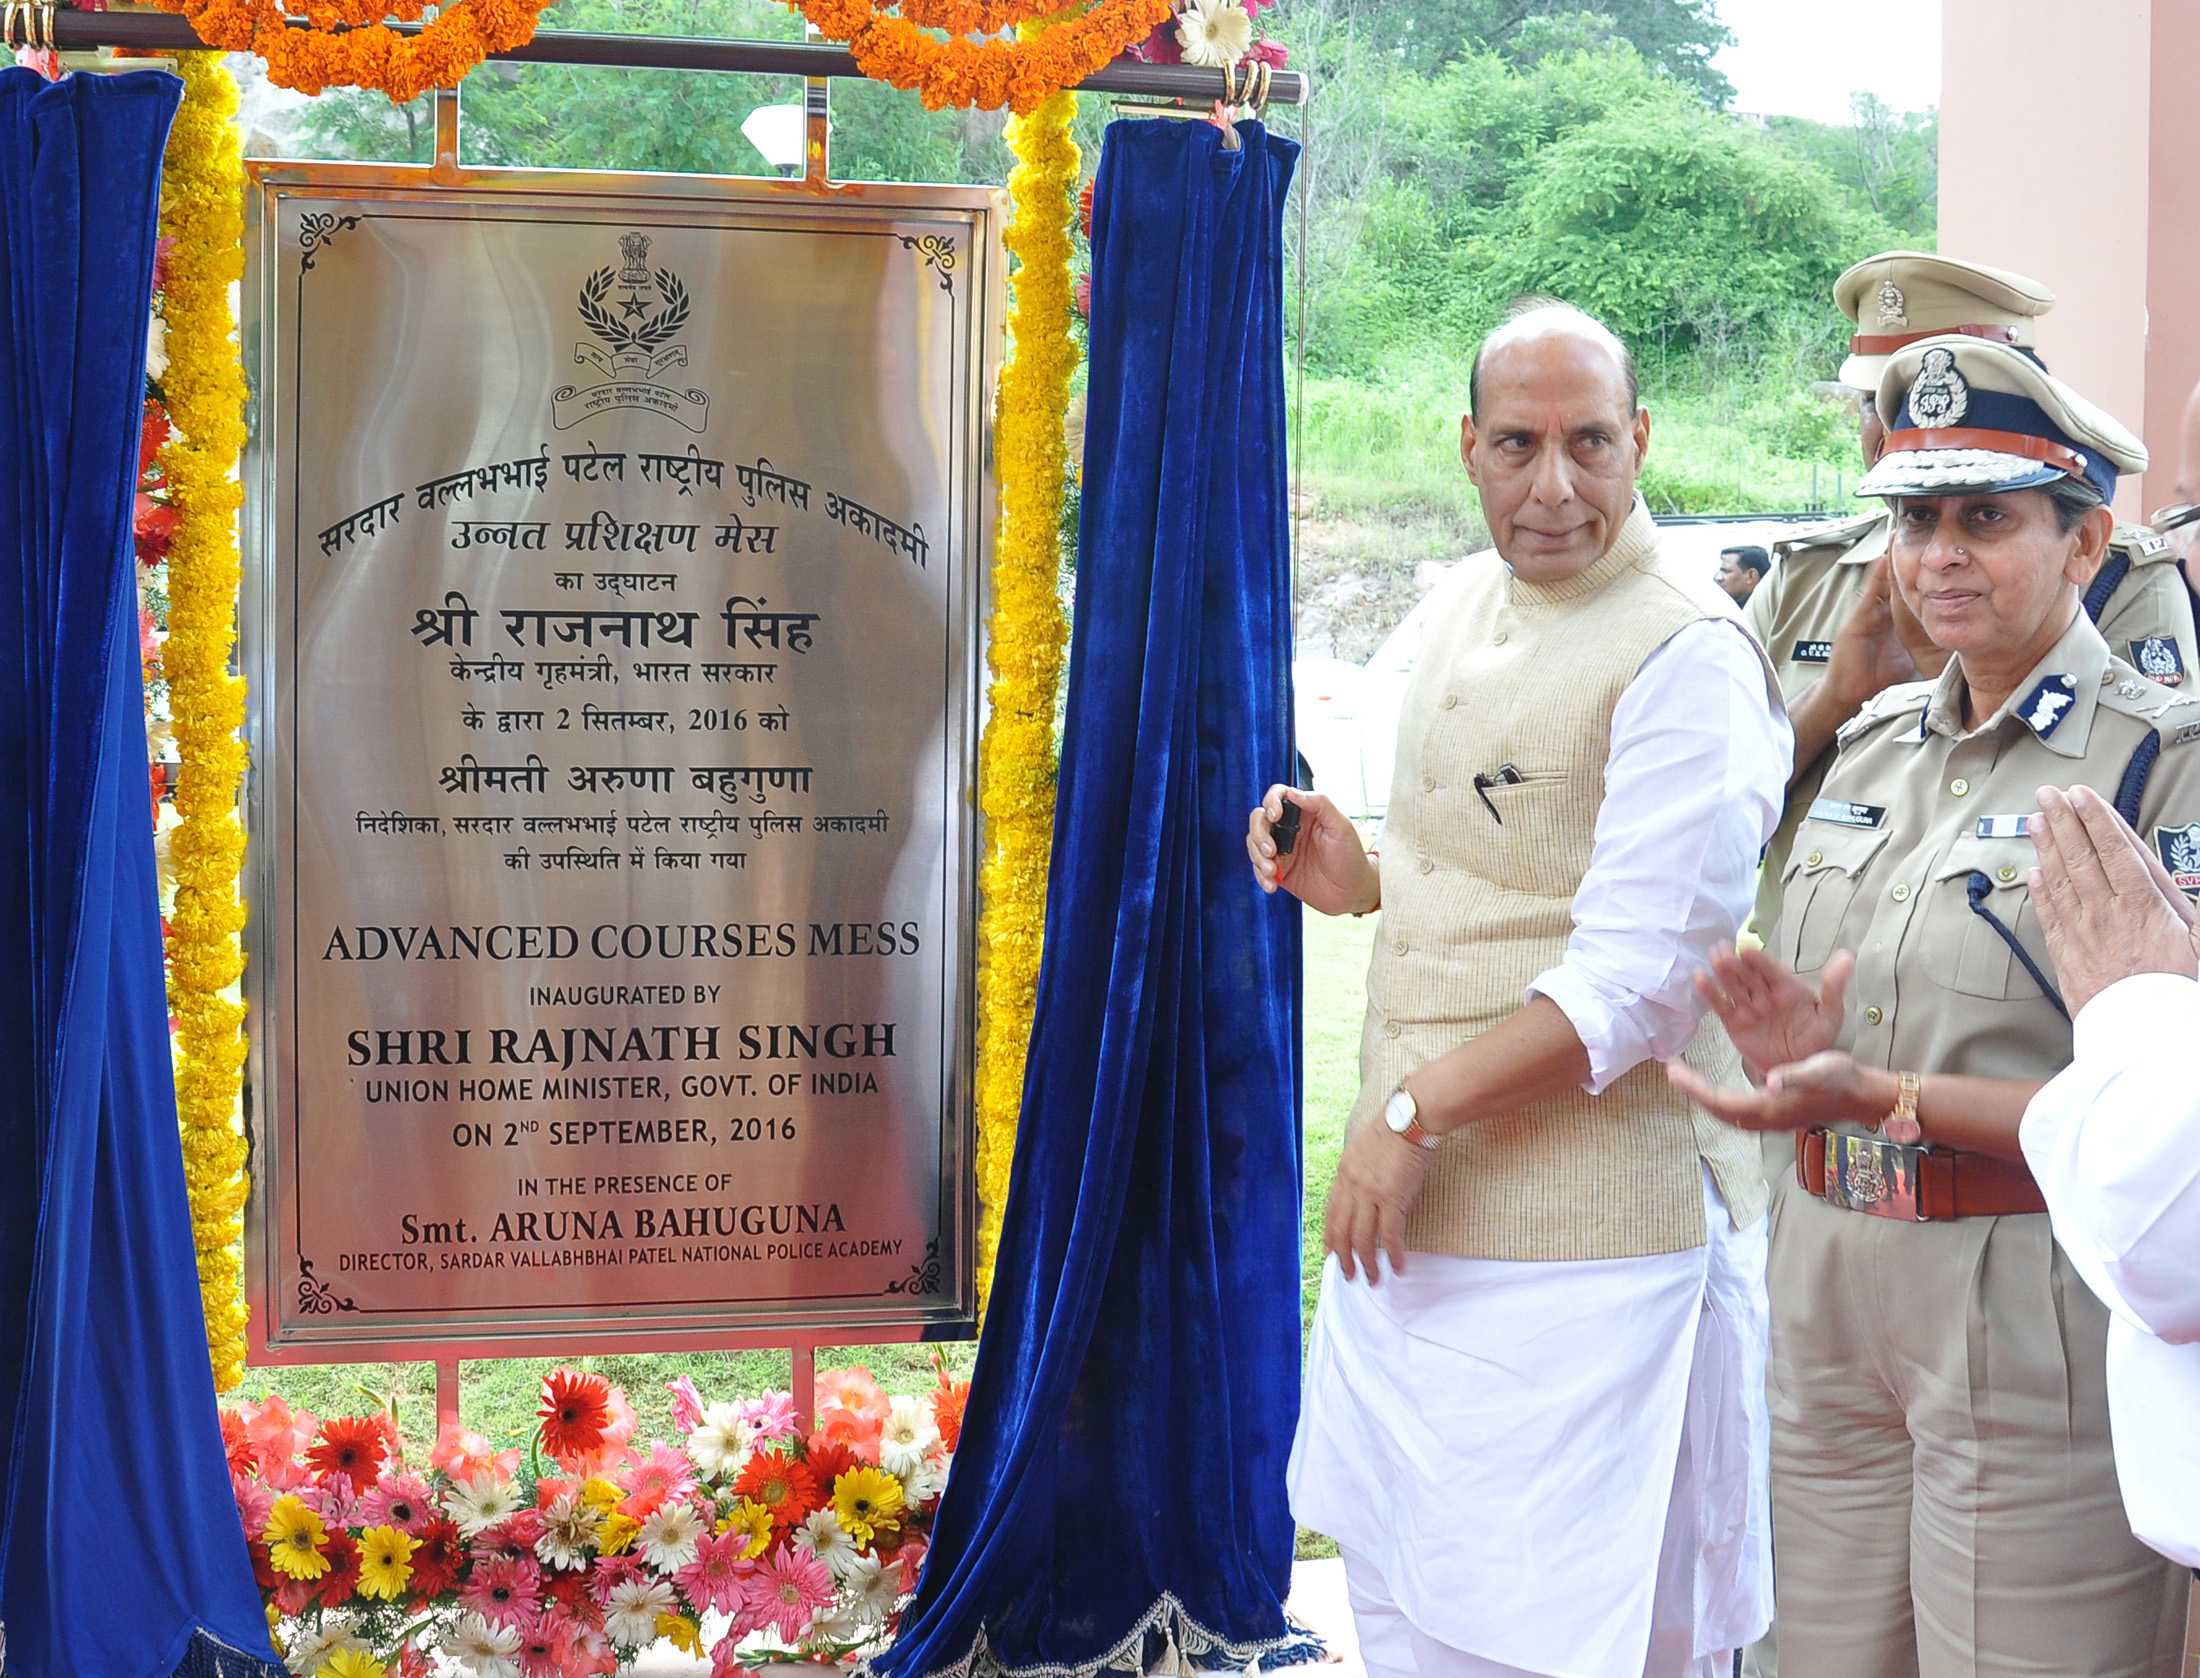 The Union Home Minister, Shri Rajnath Singh inaugurating the Advanced Courses Mess, at Sardar Vallabhbhai Patel National Police Academy, in Hyderabad on September 02, 2016.